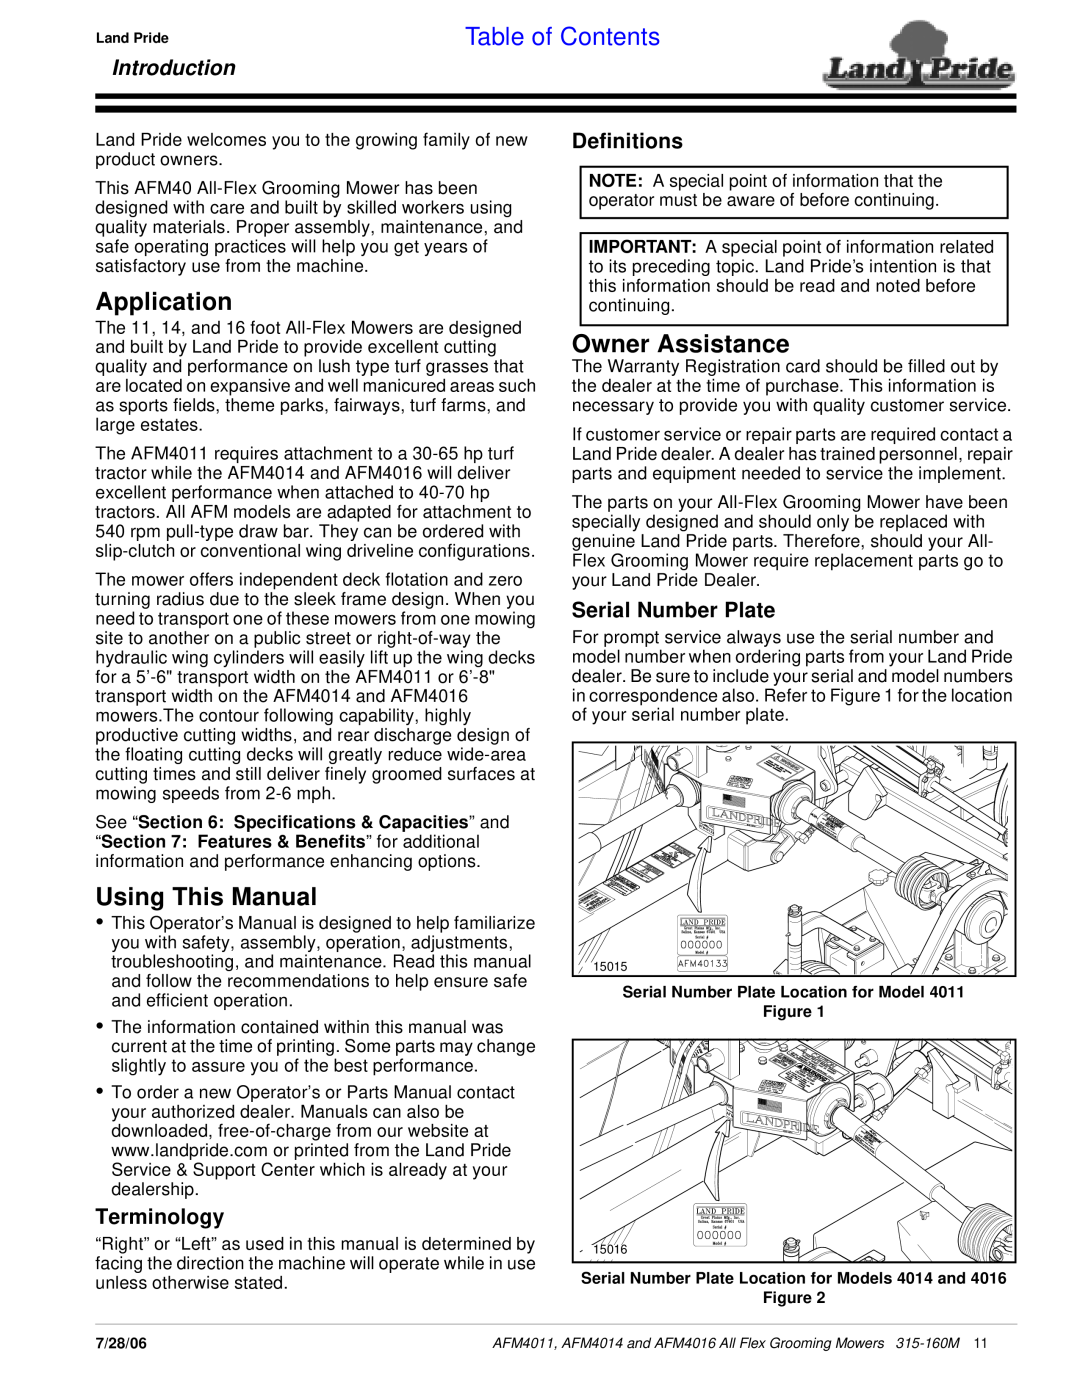 Land Pride AFM4016 manual Table of Contents, Introduction, Terminology, Definitions, Serial Number Plate 